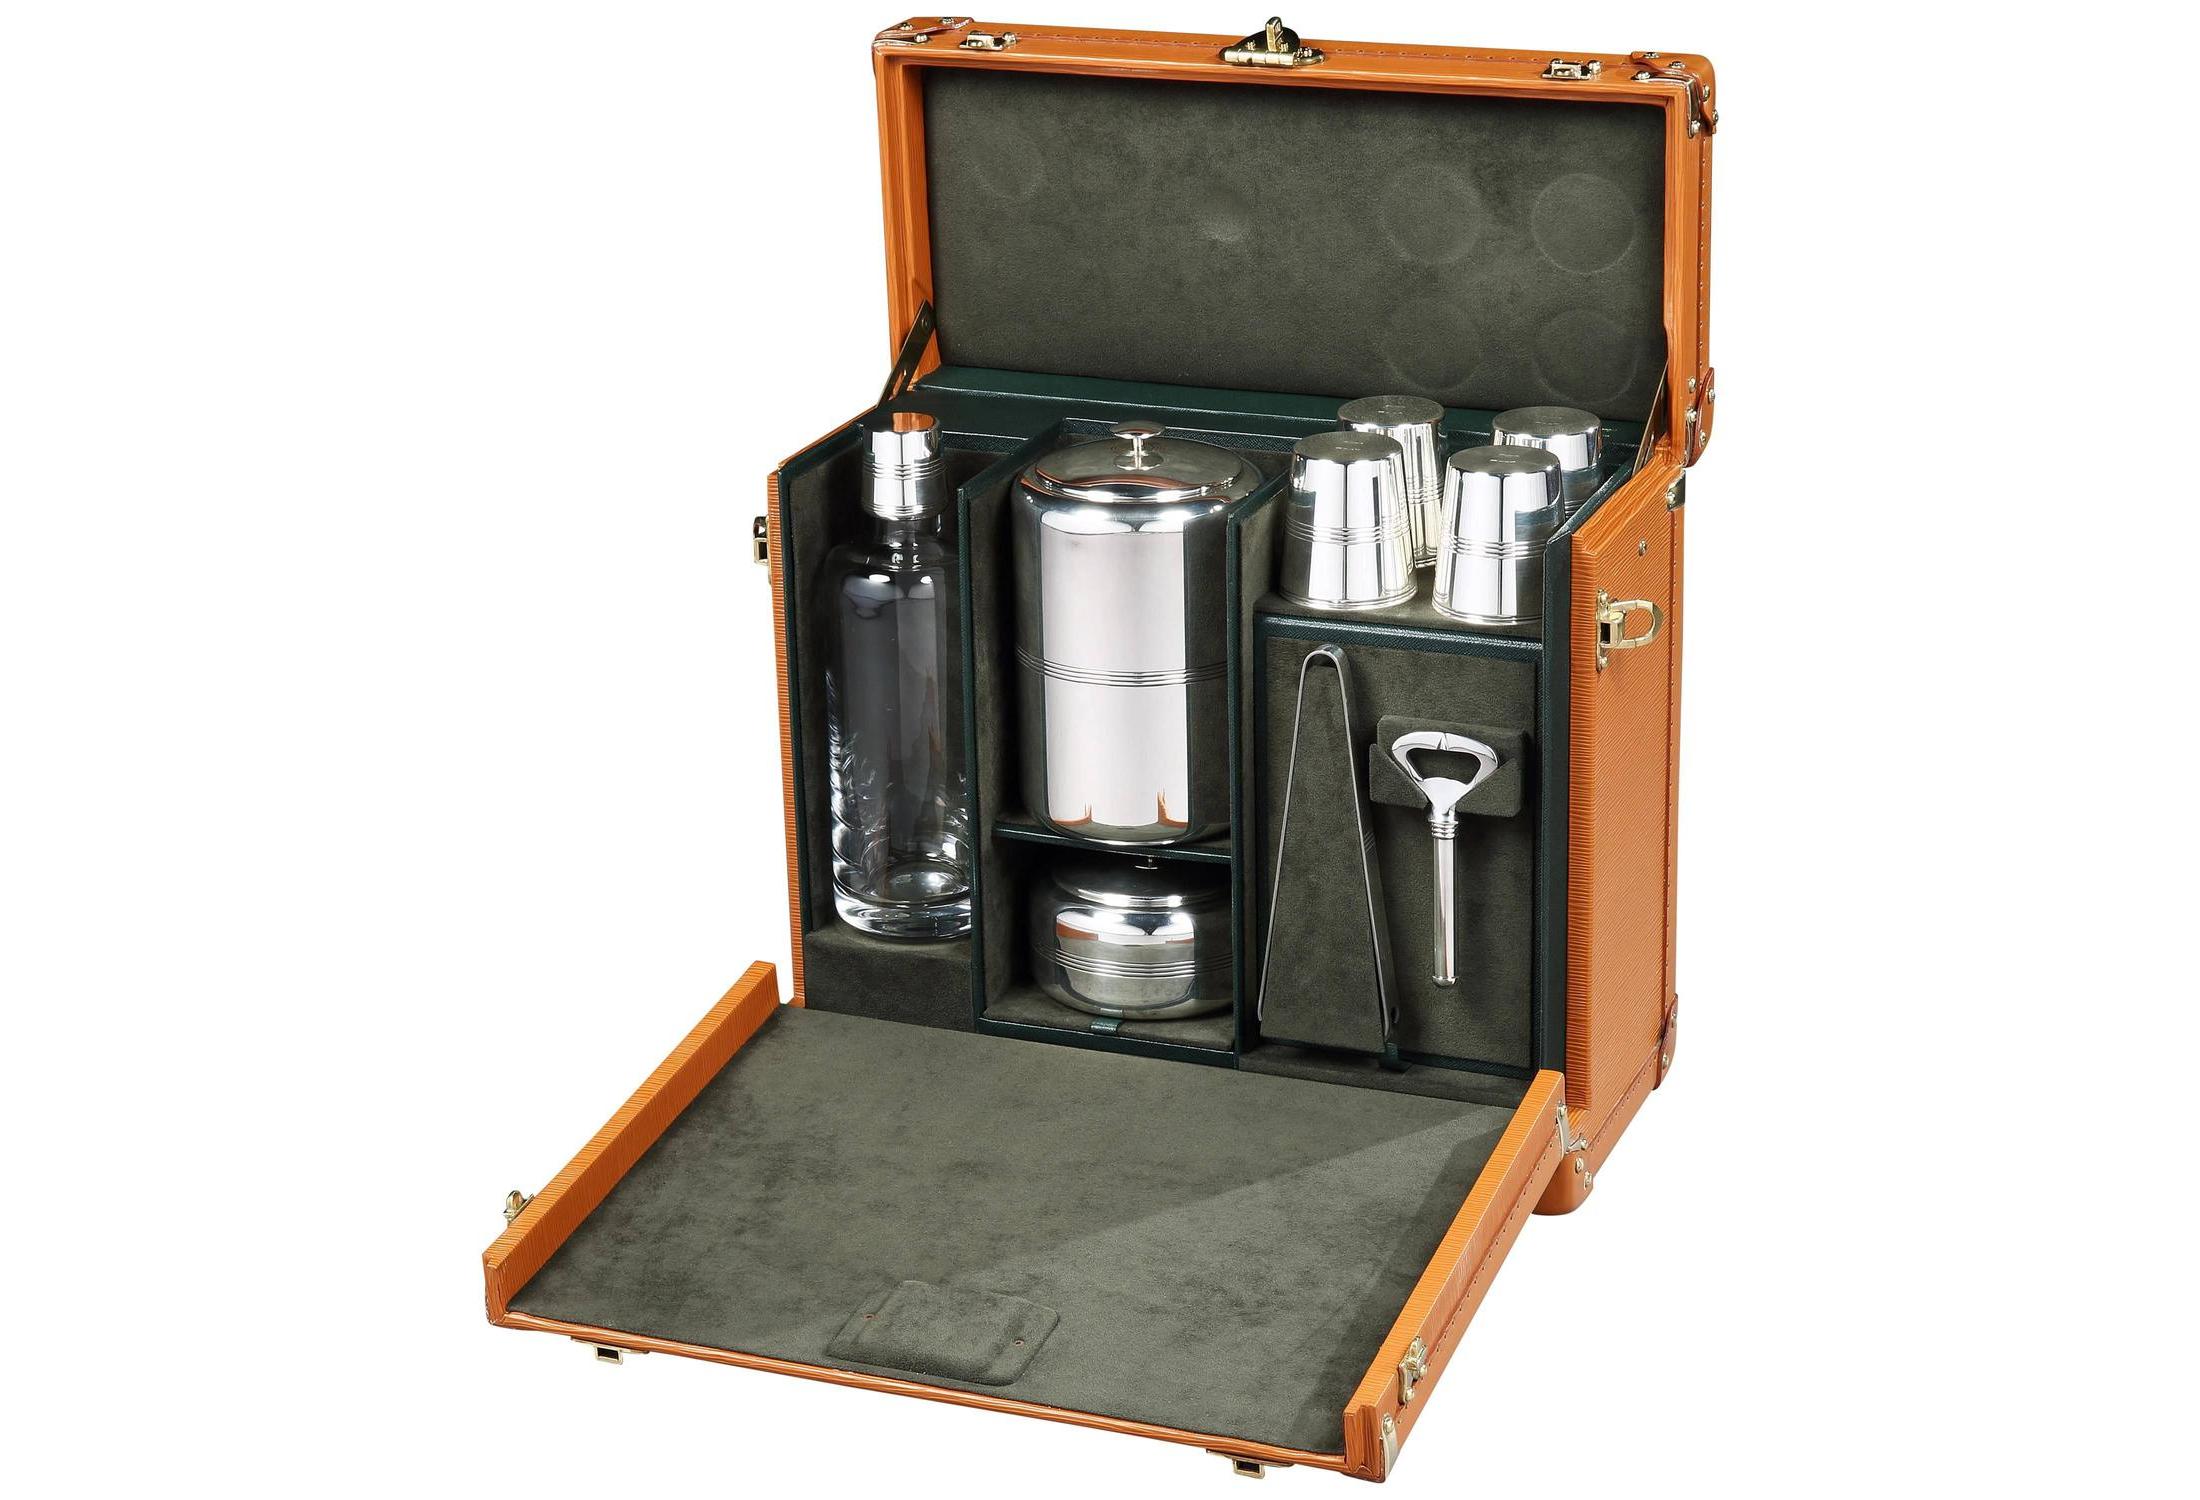 Vintage Louis Vuitton: Check out this travelling bar from the ‘80s that’s up for grabs